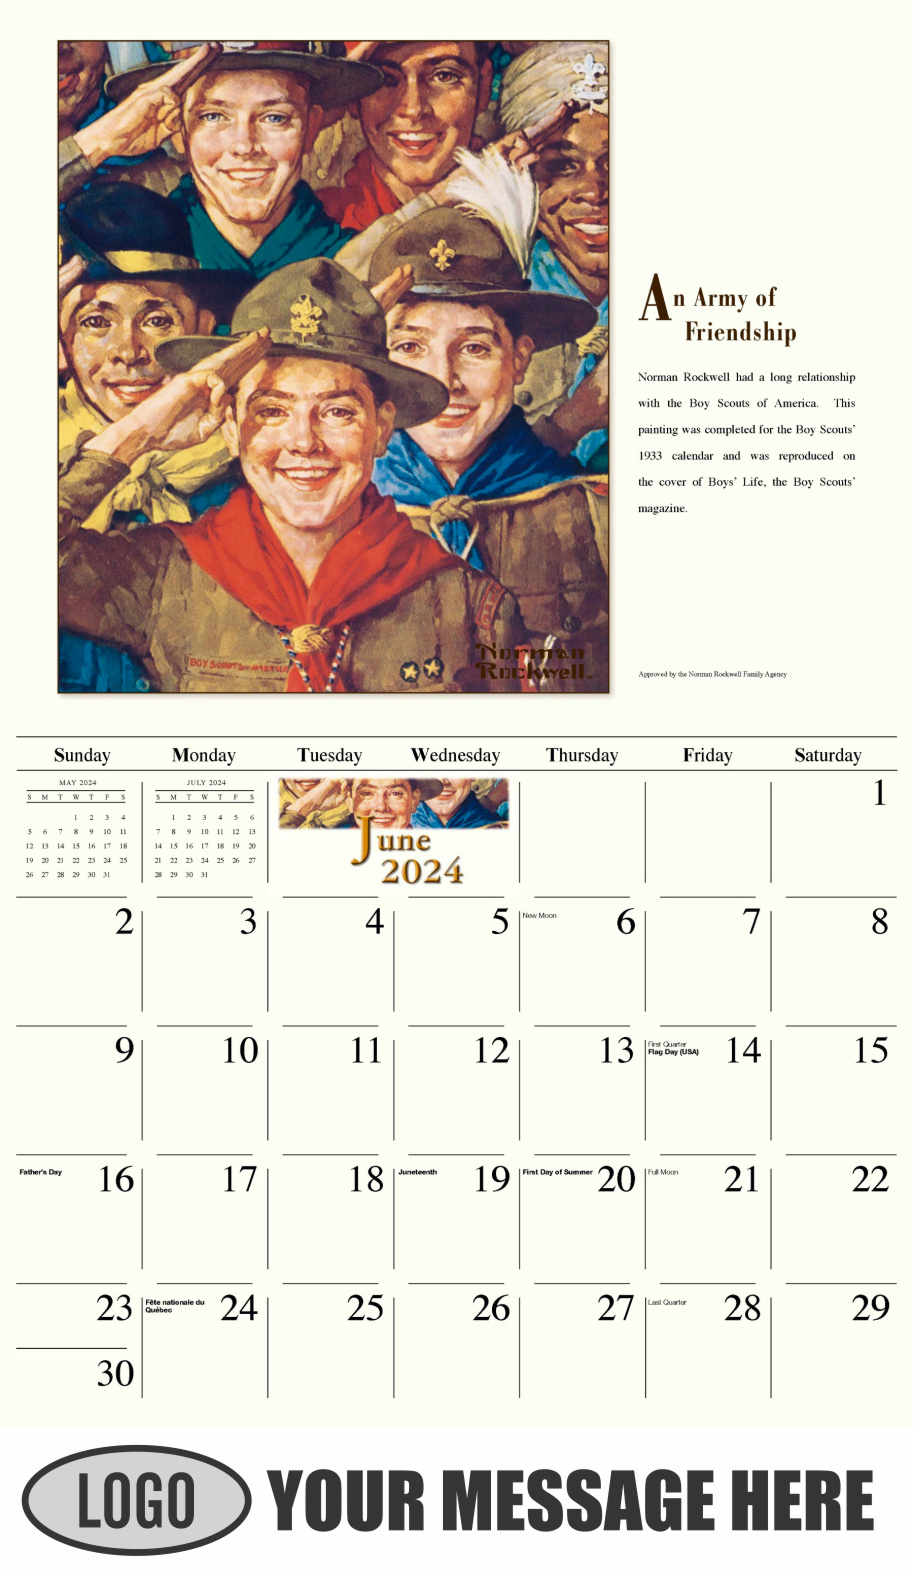 Memorable Images by Norman Rockwell 2024 Business Promotional Wall Calendar - June